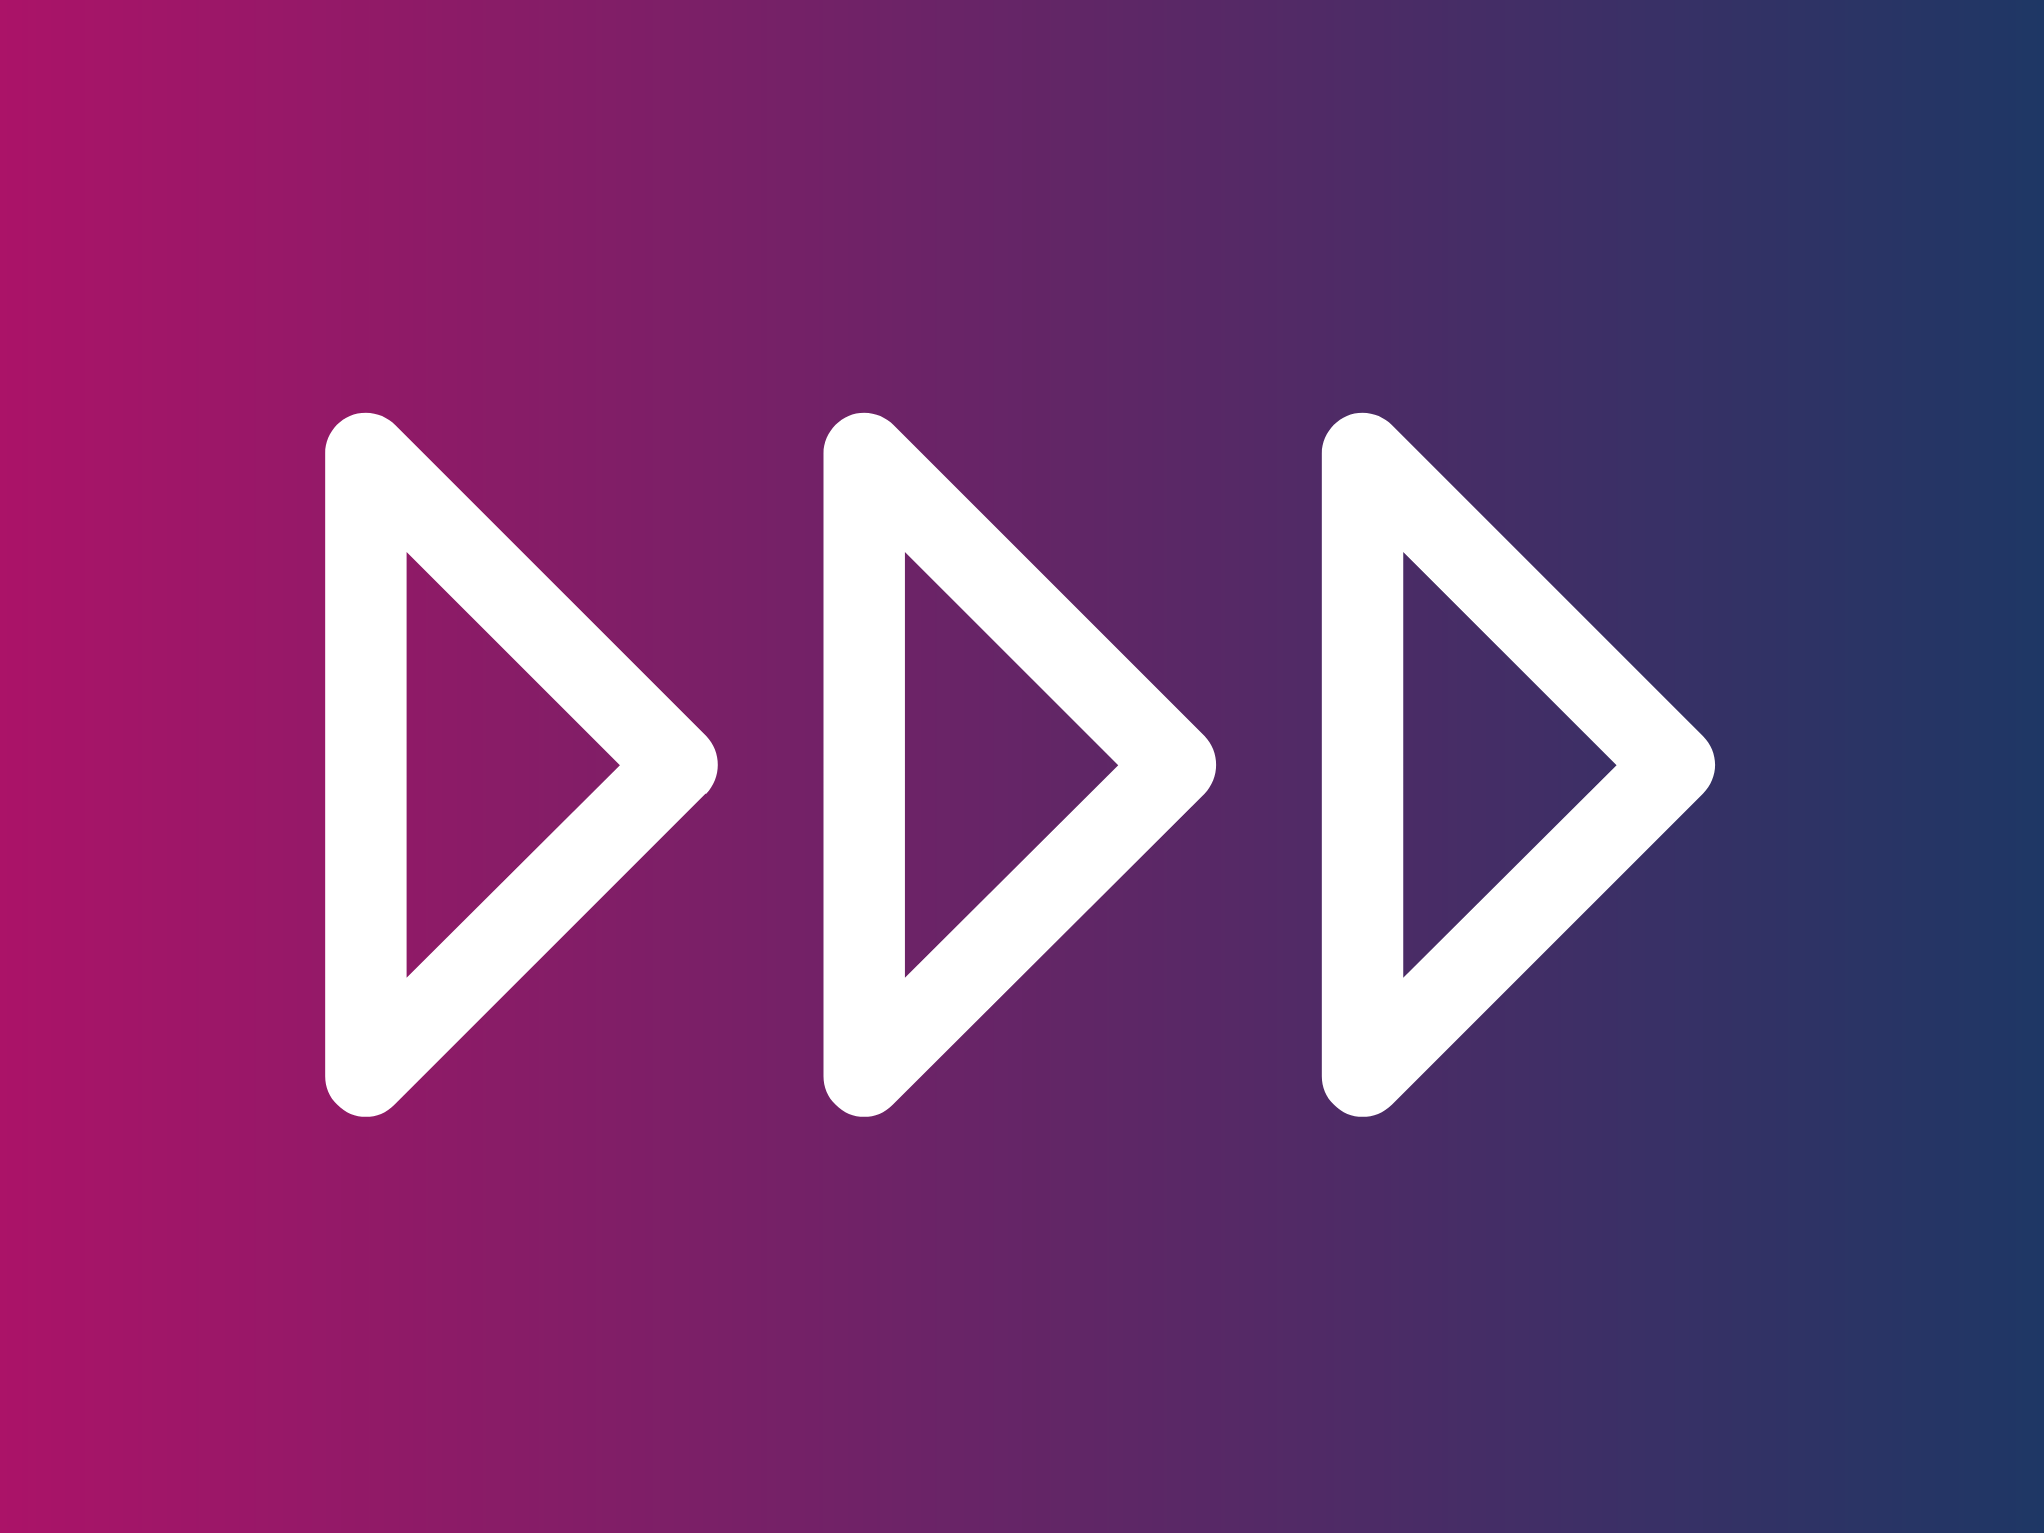 white play arrows facing right on pink and navy gradient background